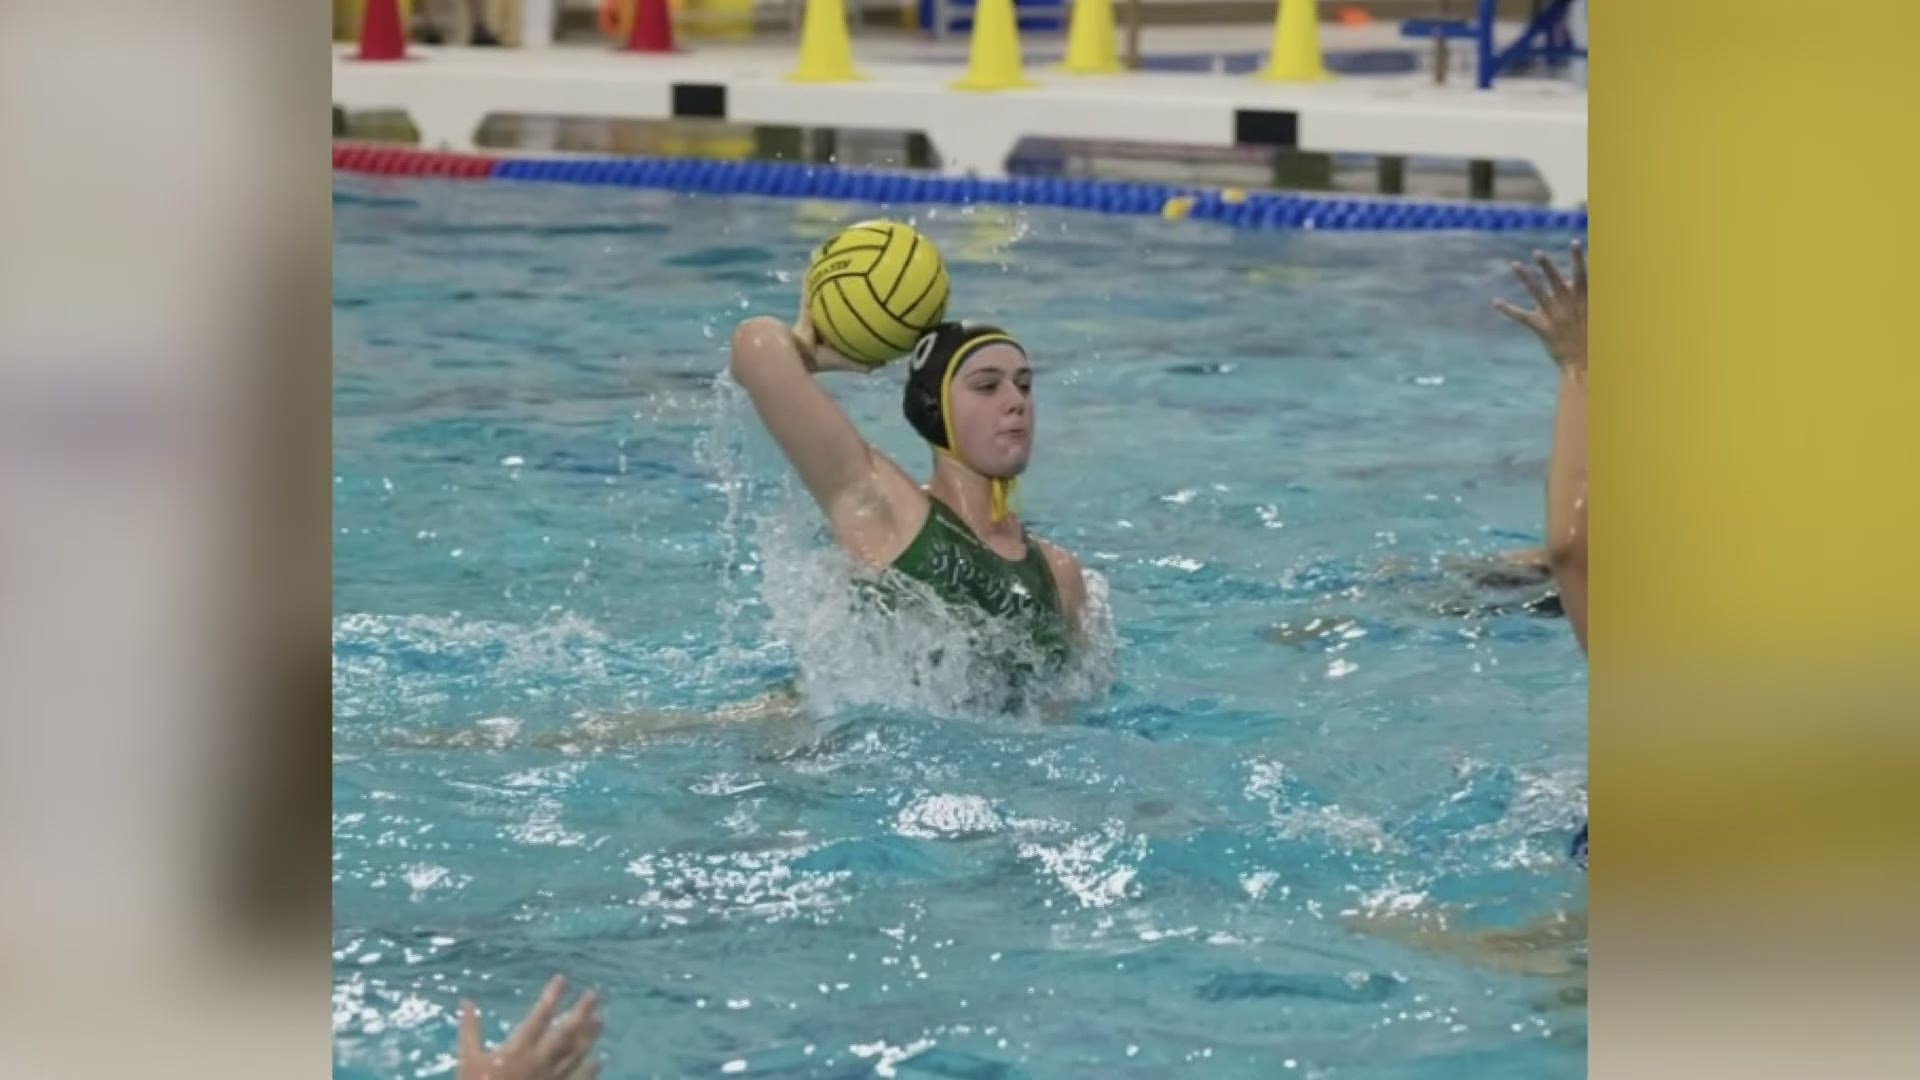 Persch swims and plays water polo for Hudsonville.